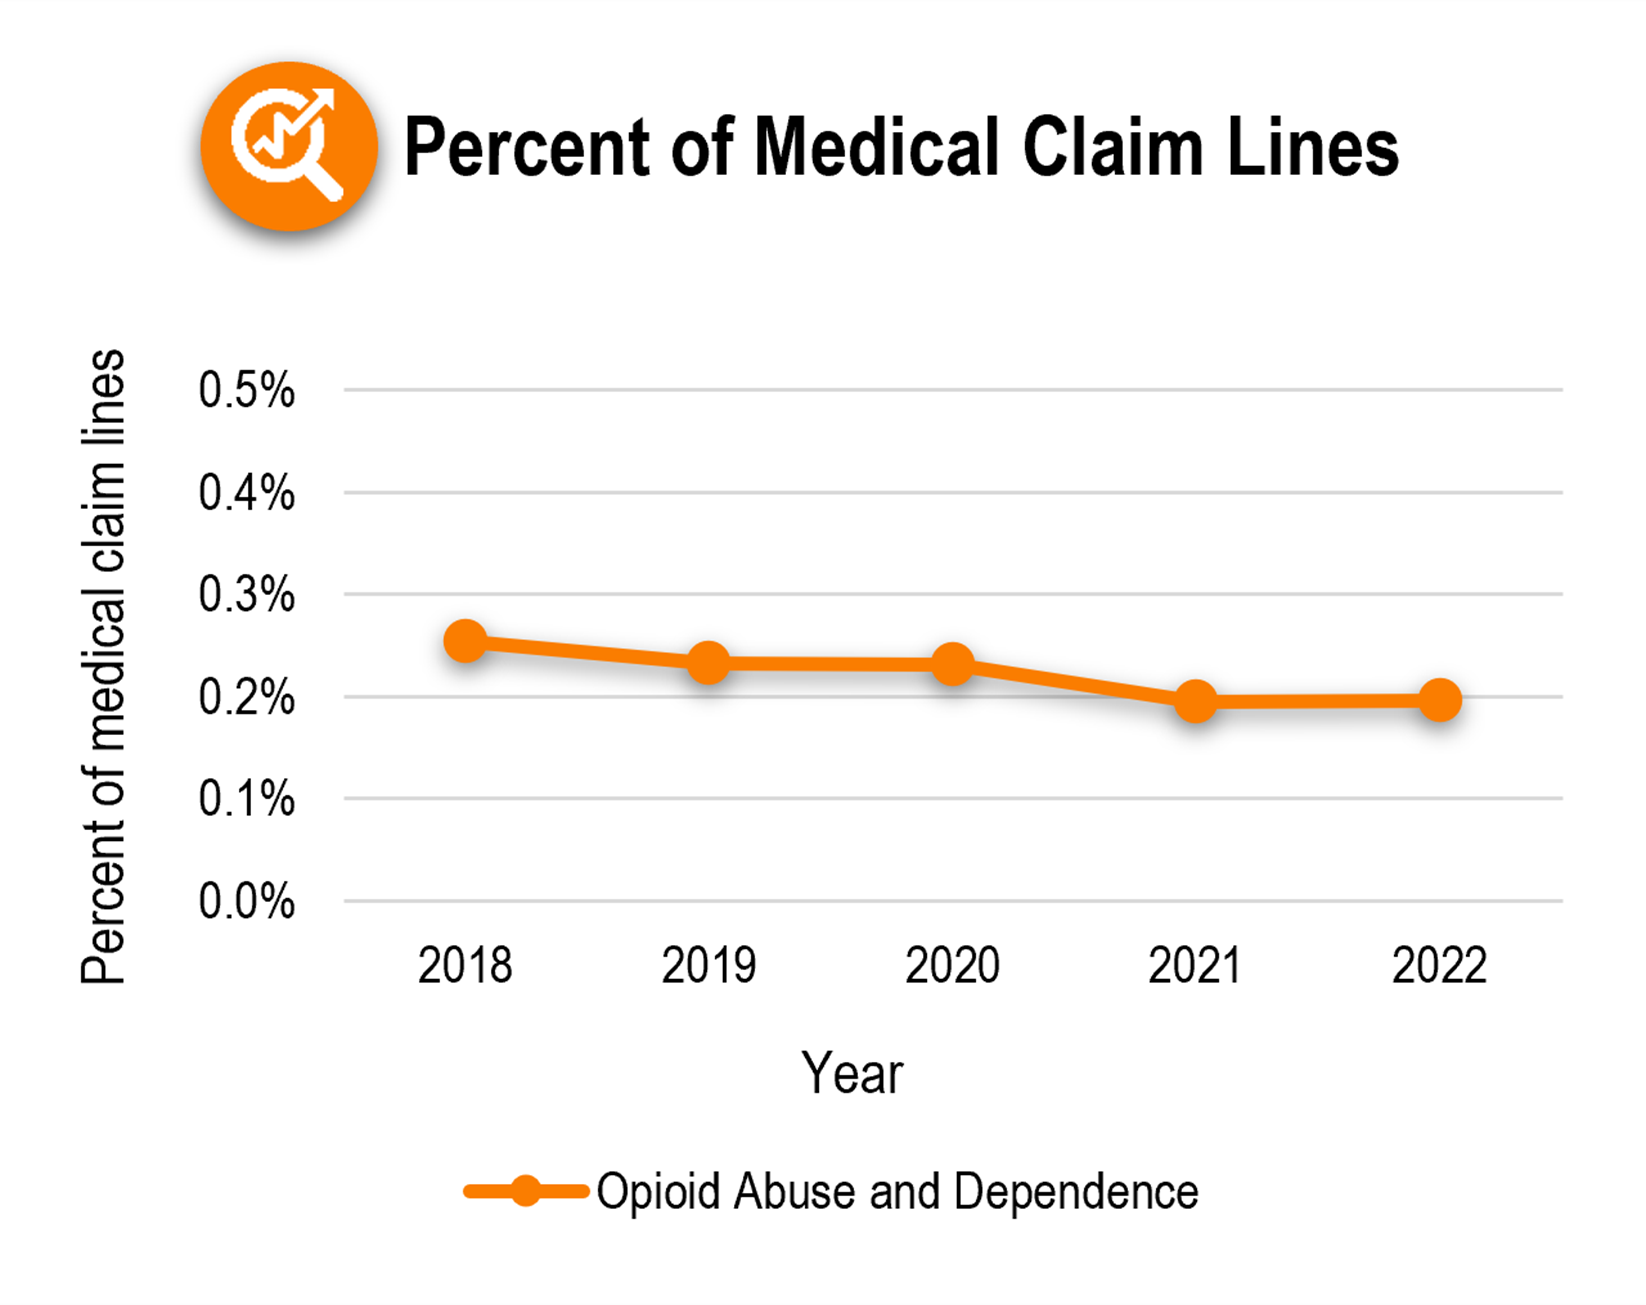 Figure 2. Opioid Abuse and Dependence Claim Lines as Percent of Medical Claim Lines, National, 2018-2022. Credit: FAIR Health